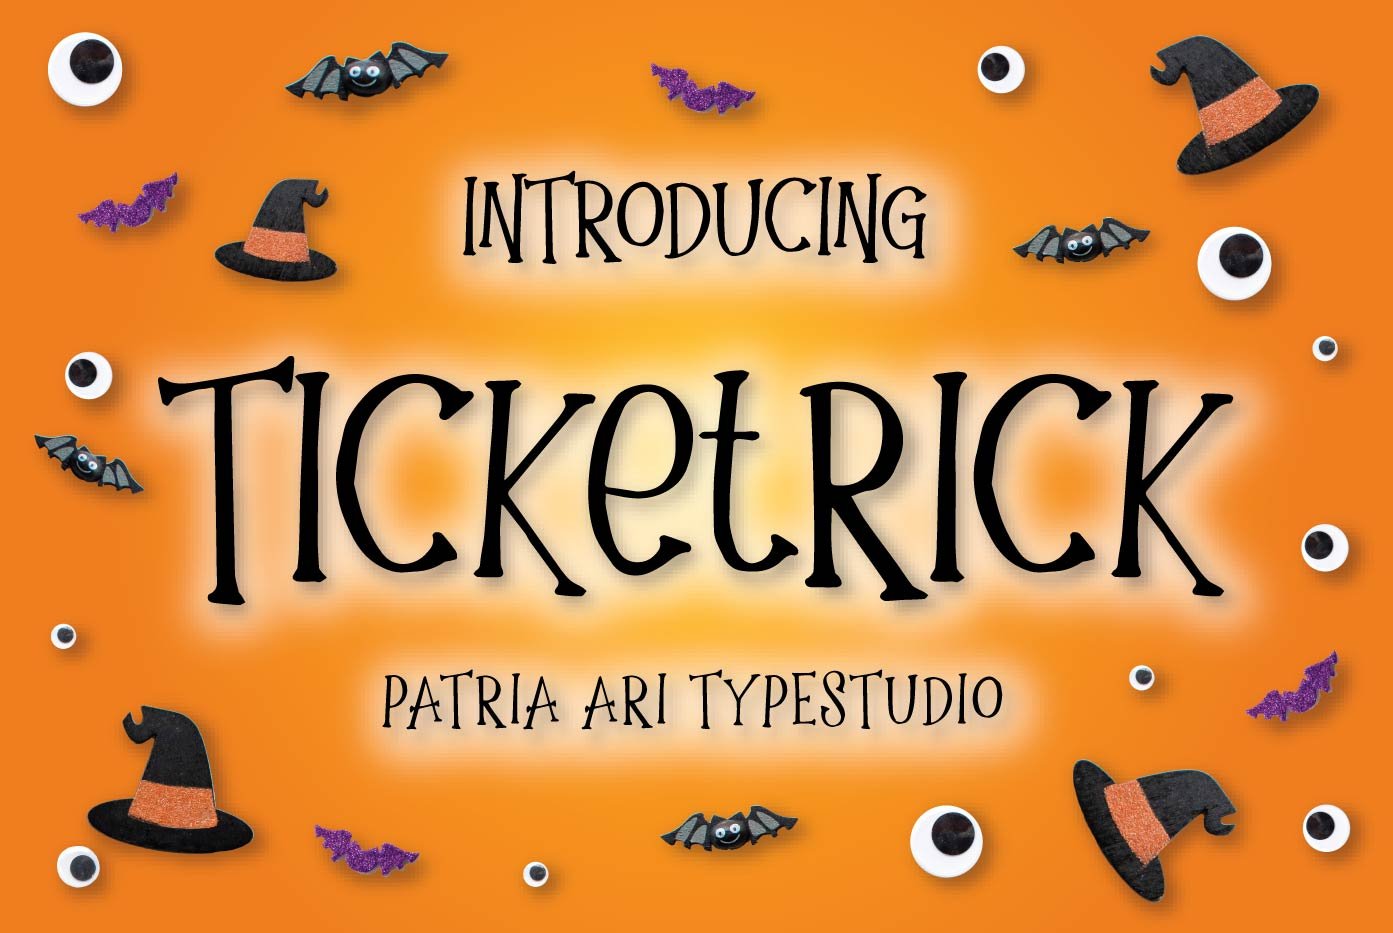 Ticketrick - Halloween Fonts cover image.